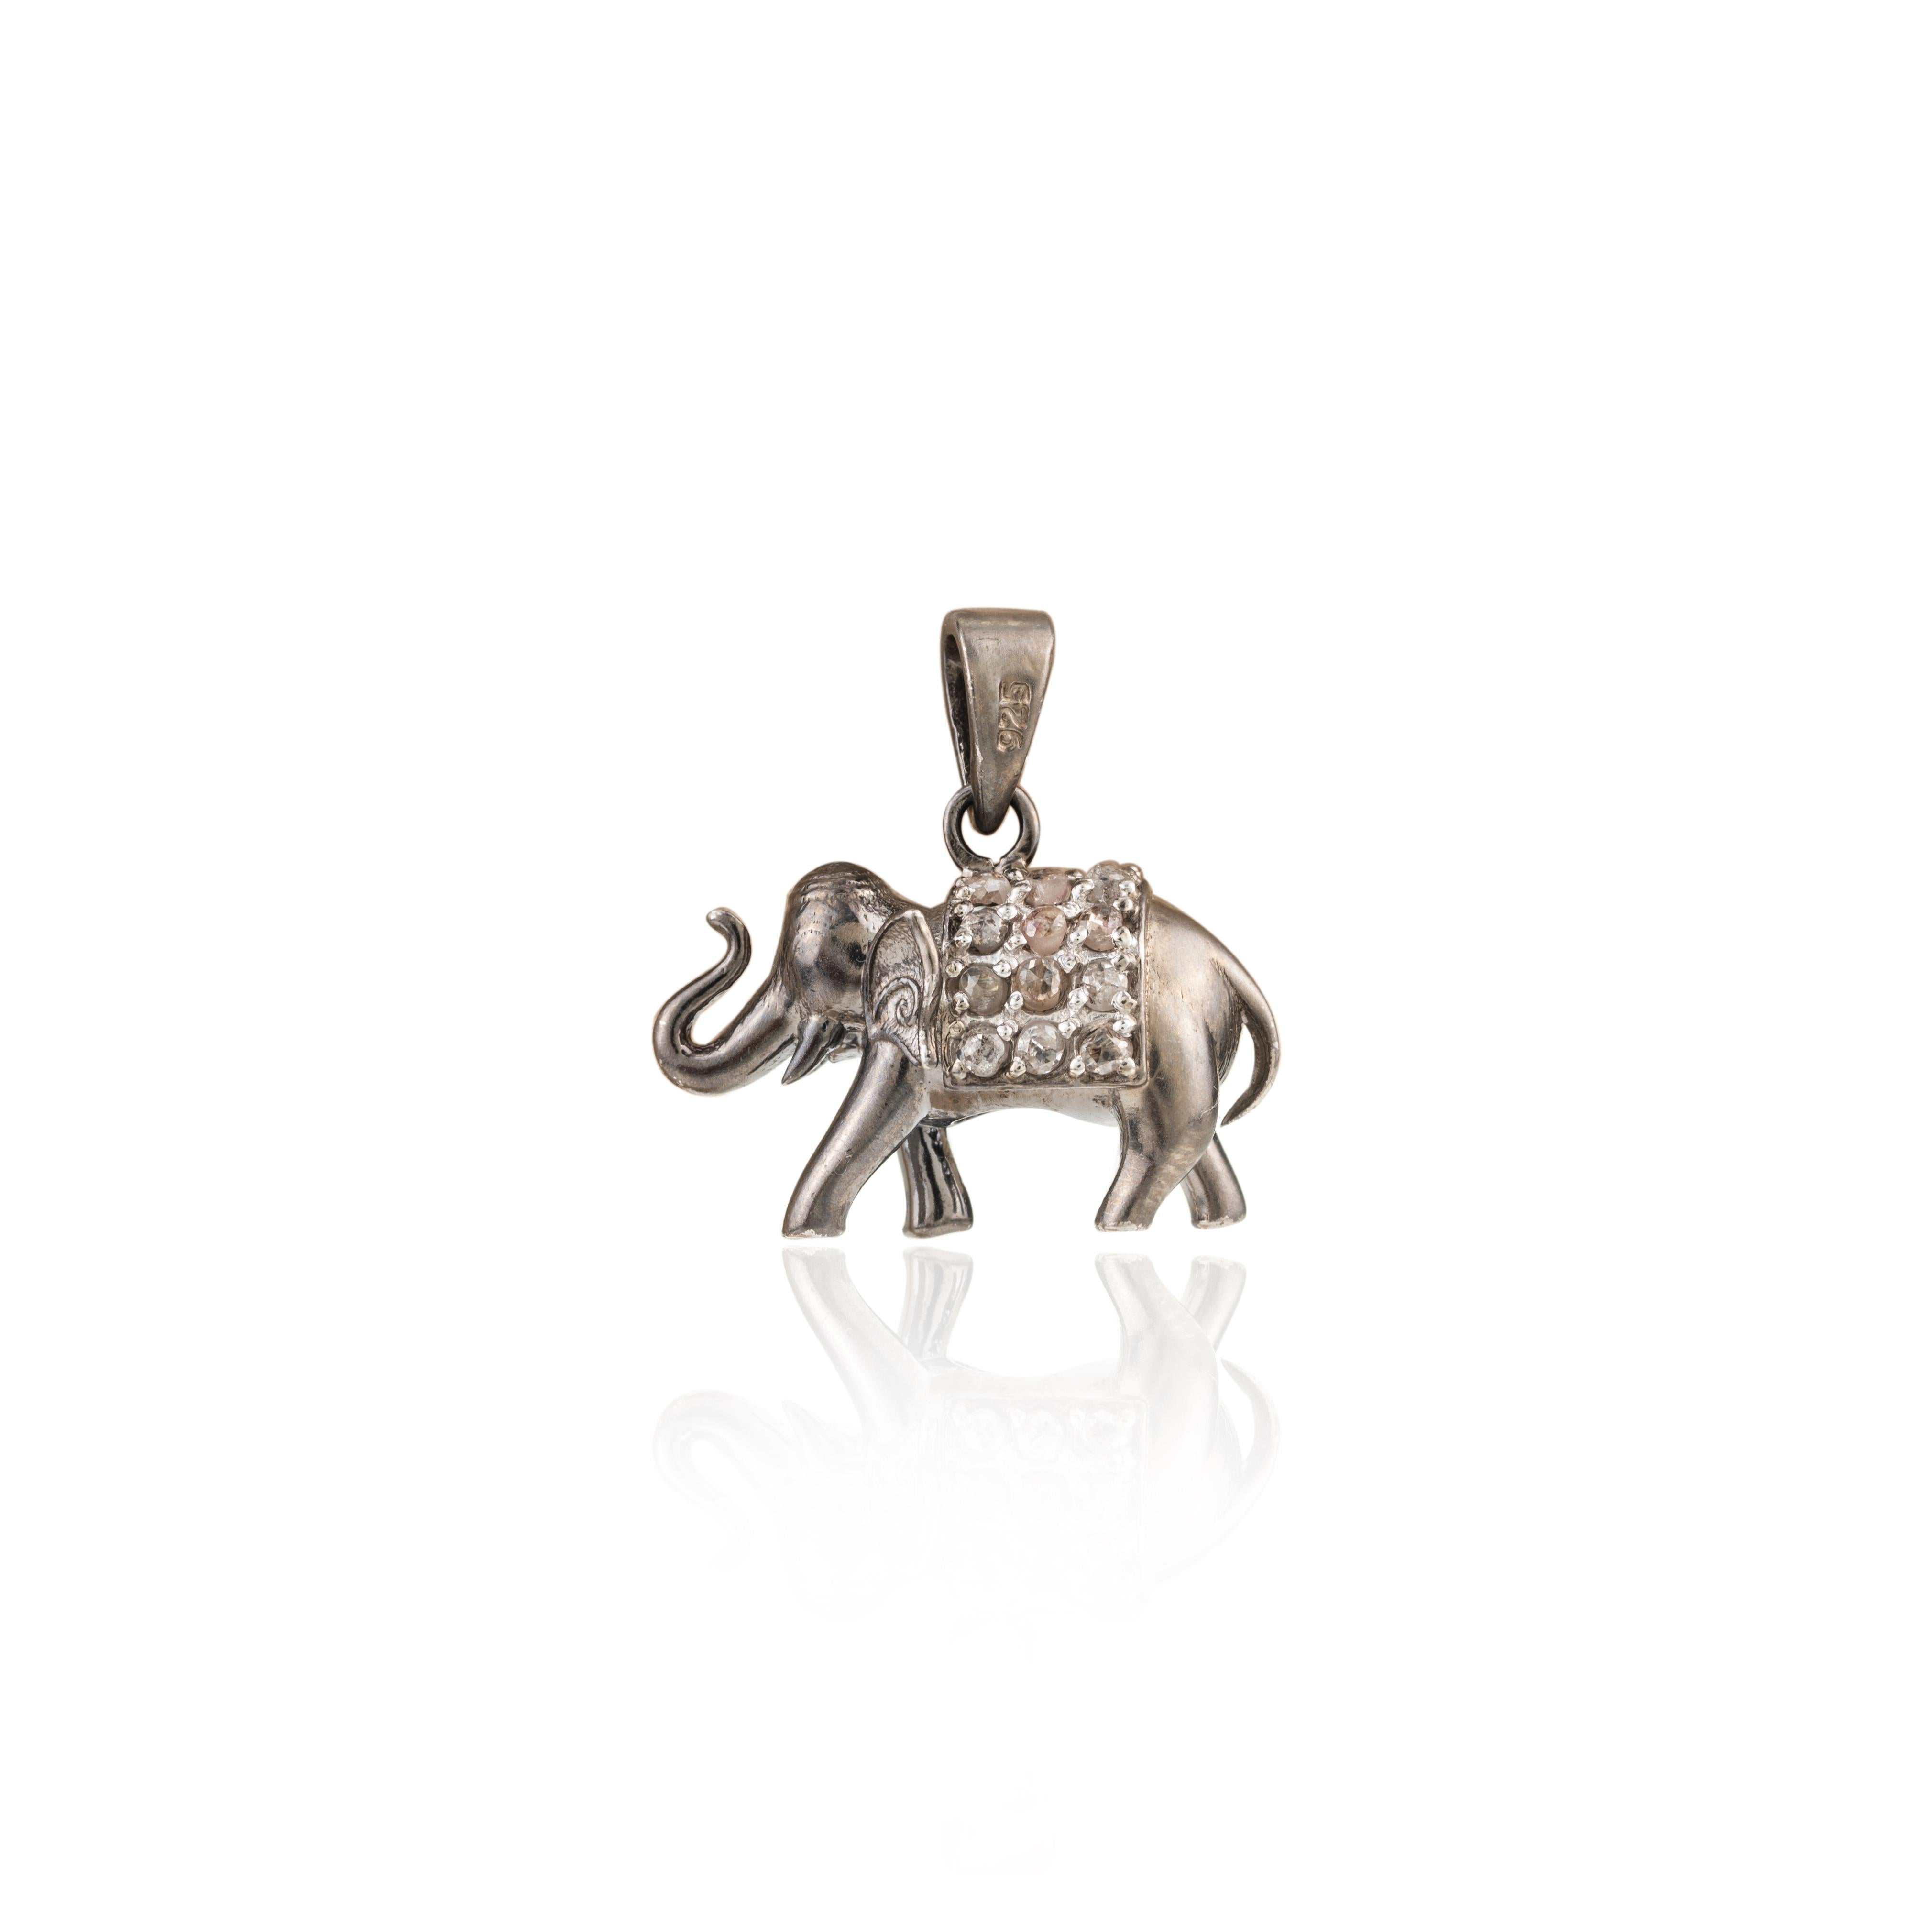 Round Cut Vintage Style 925 Sterling Silver Diamond Elephant Pendant Unisex Gifts For Sale